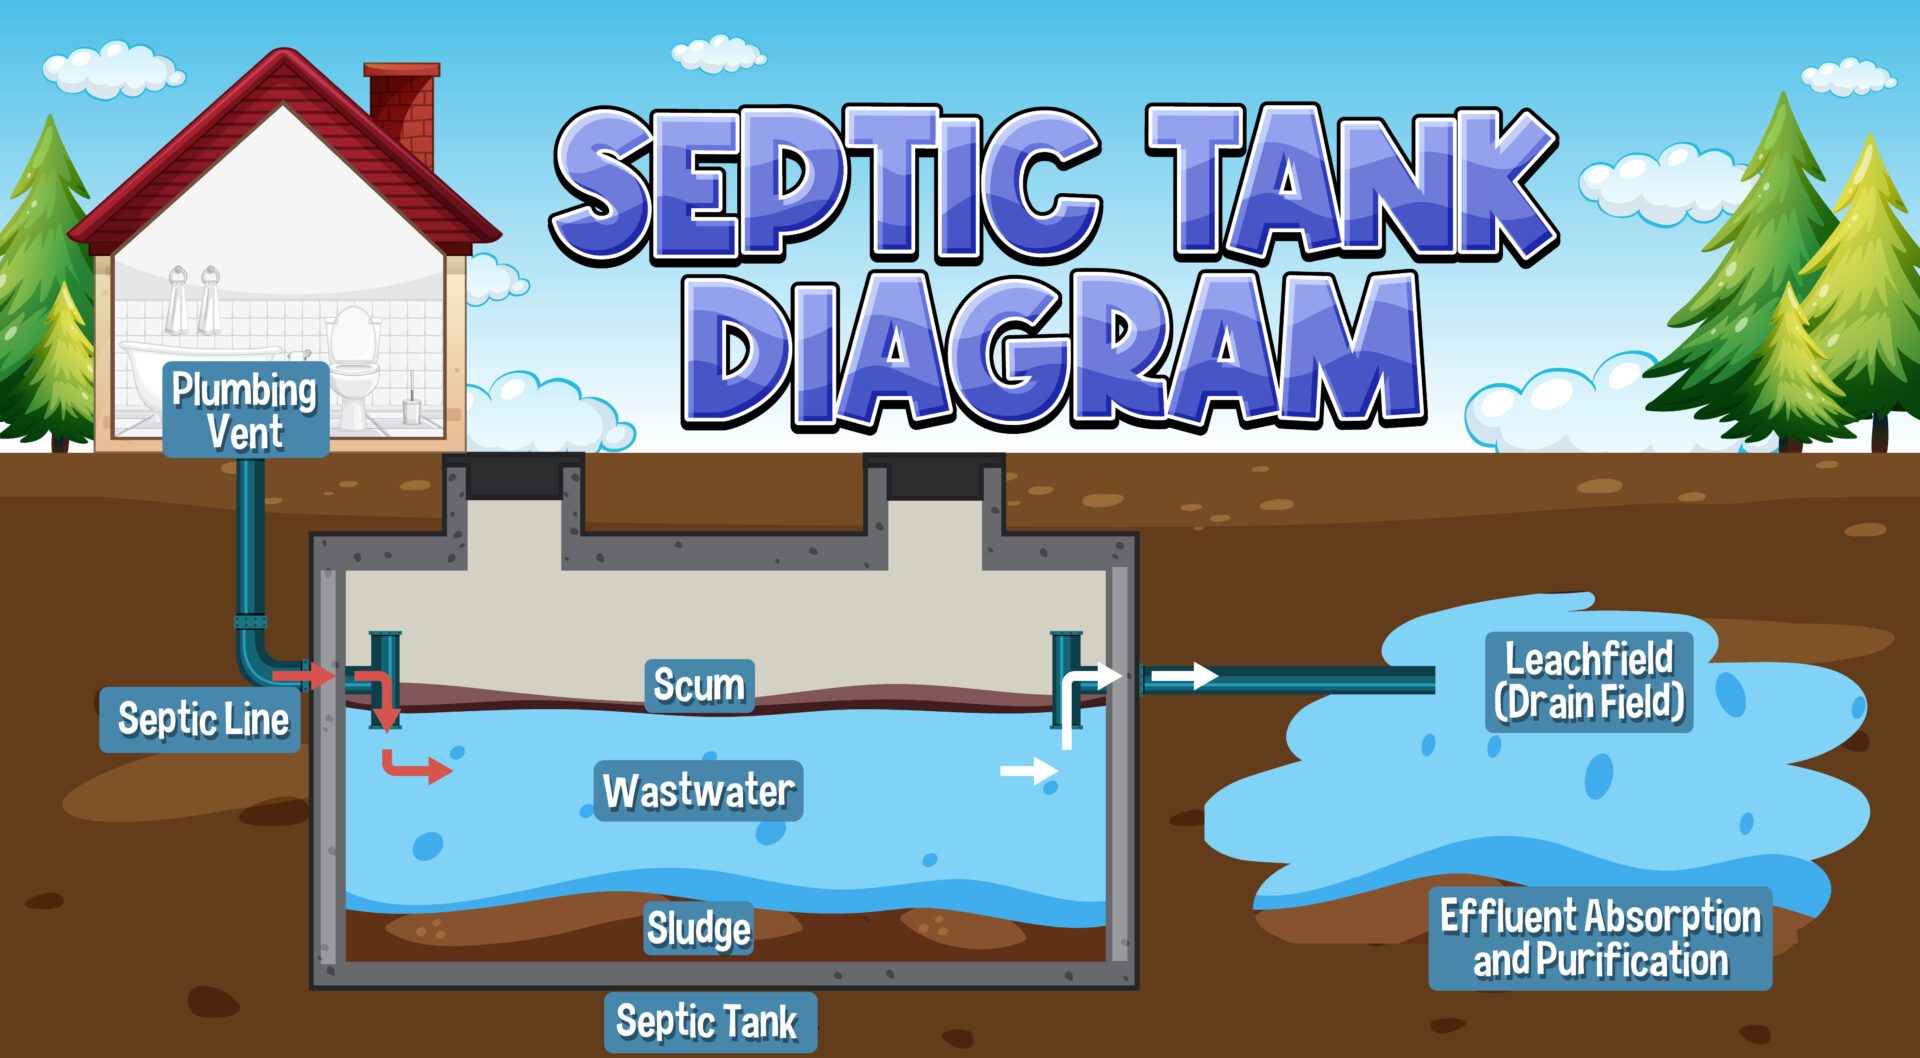 Septic tank design with water in the ground illustration